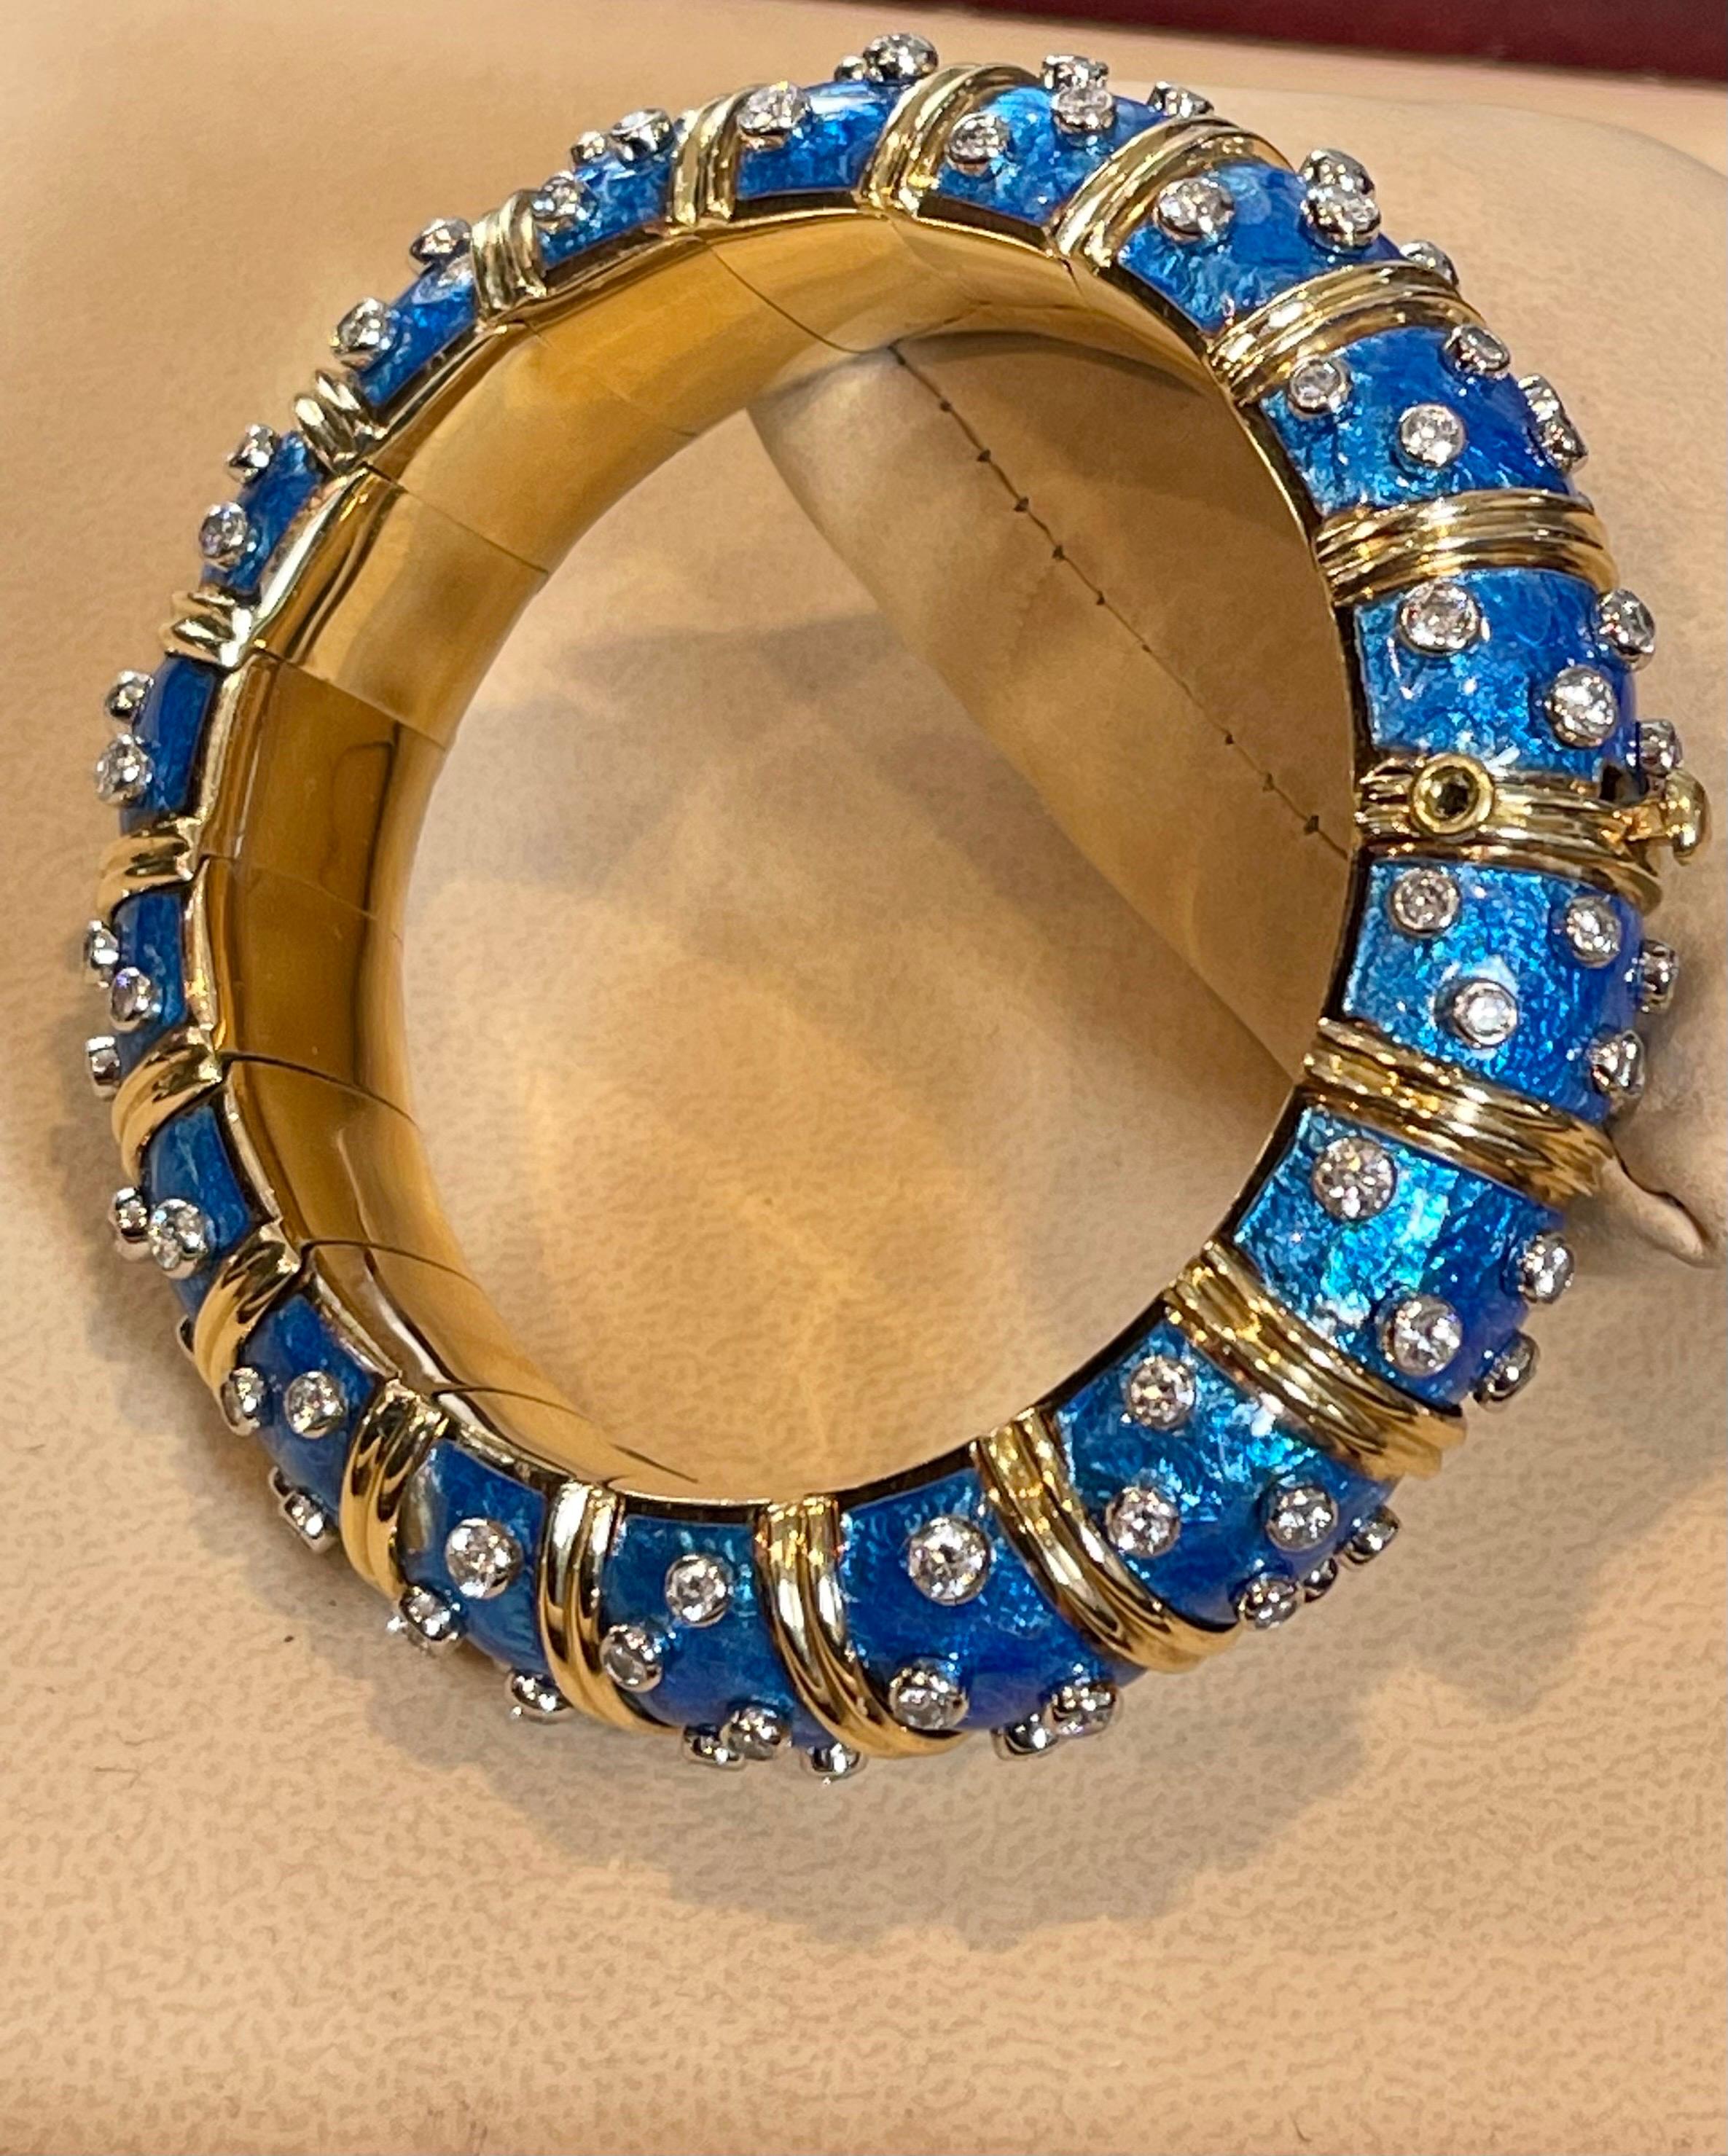 Tiffany & Co. Schlumberger Platinum 18 K Gold Blue Enamel 5.96 Ct Diamond Bangle In Excellent Condition For Sale In New York, NY